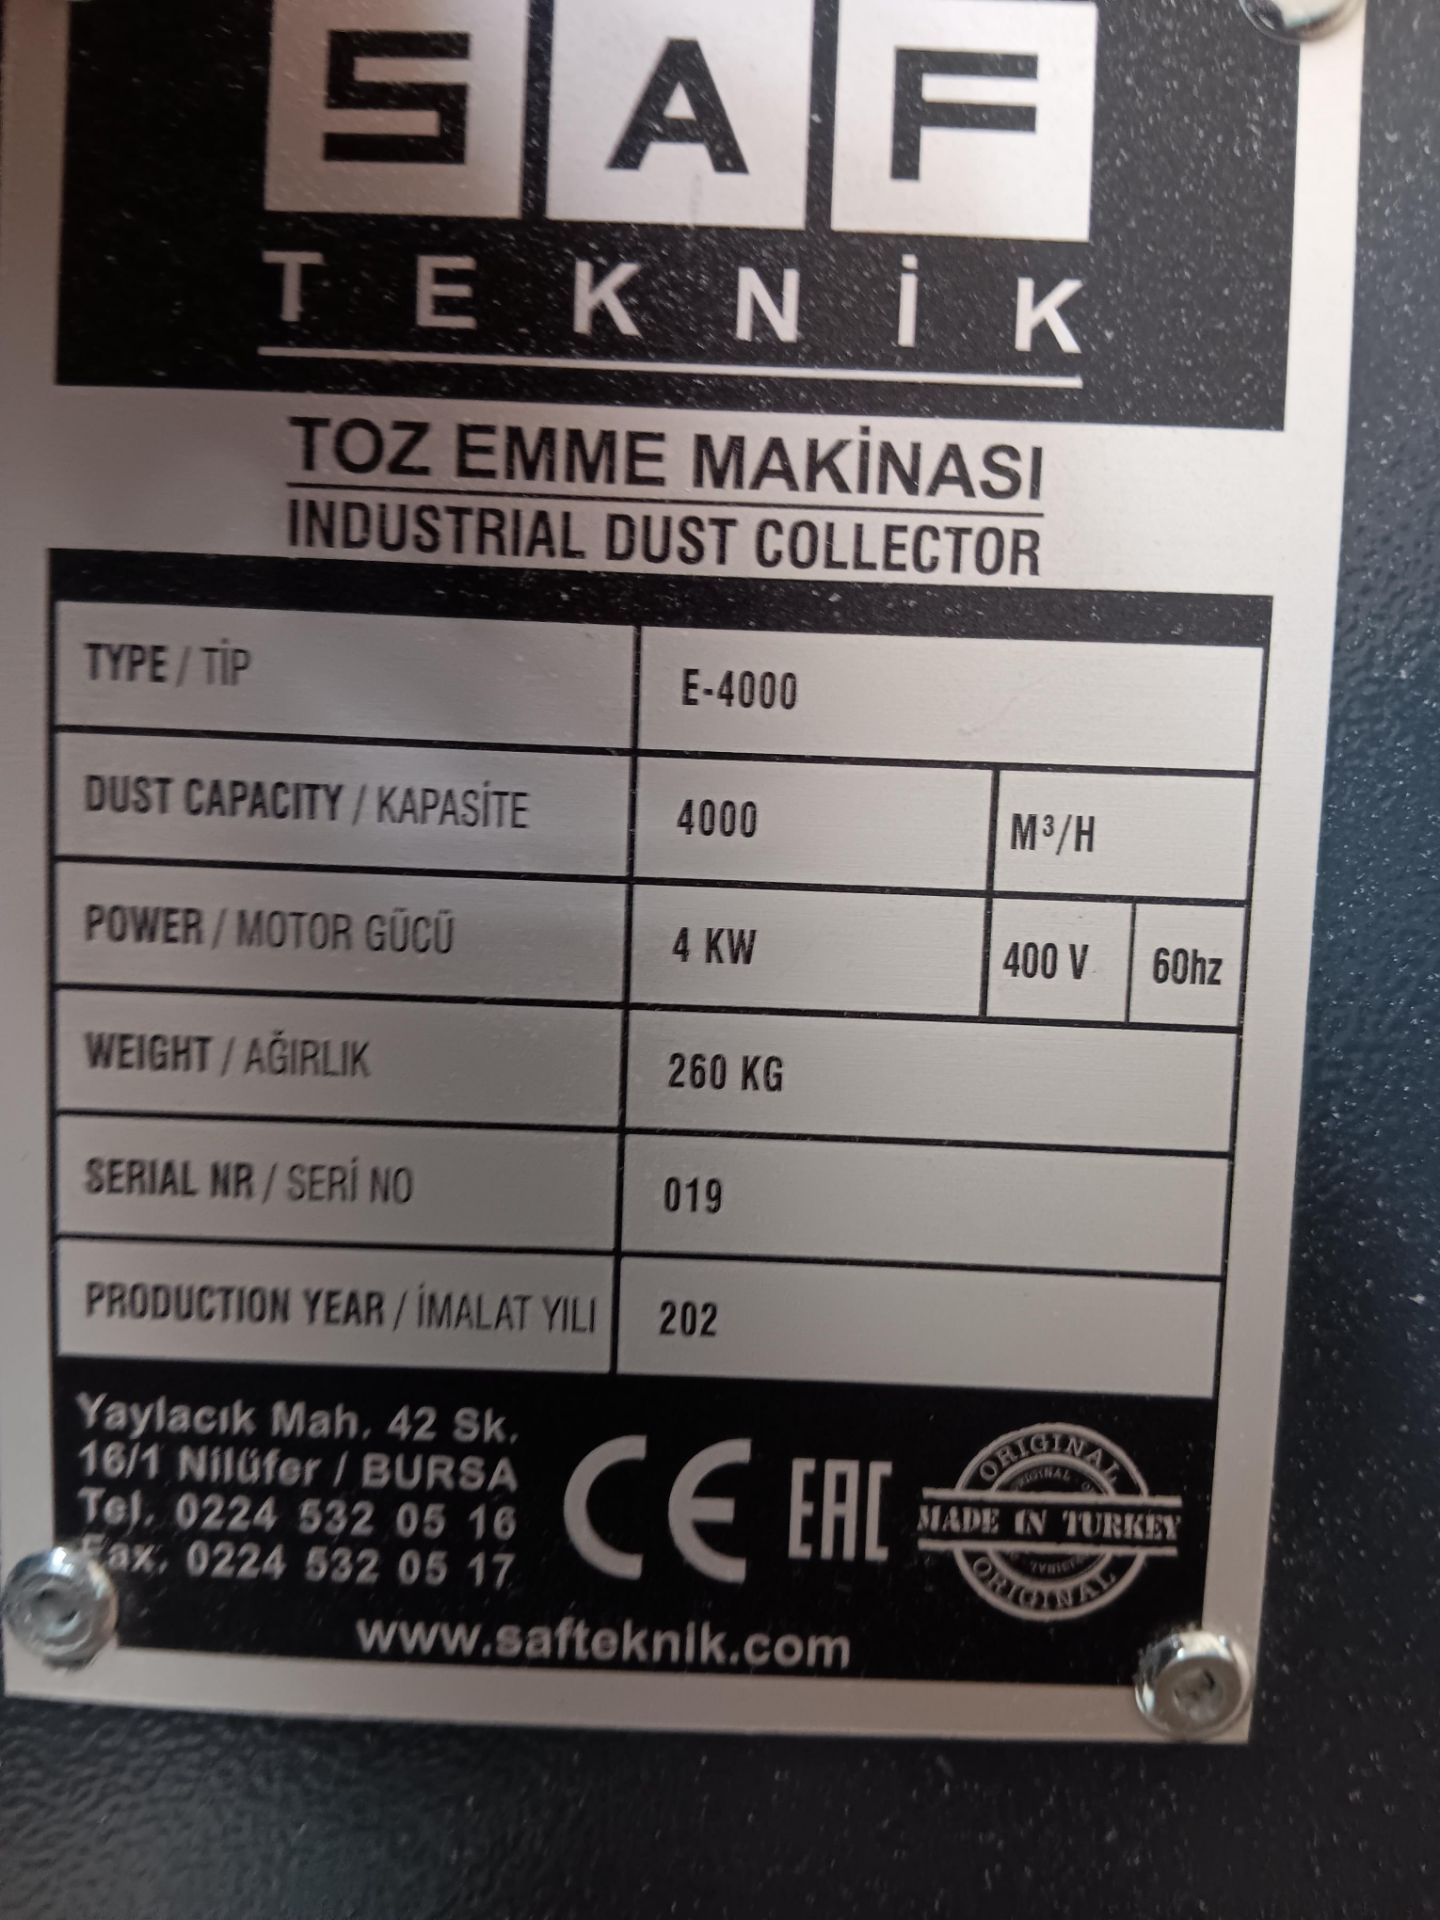 ITech E-4000 dust extractor Serial number 019 - Image 2 of 3